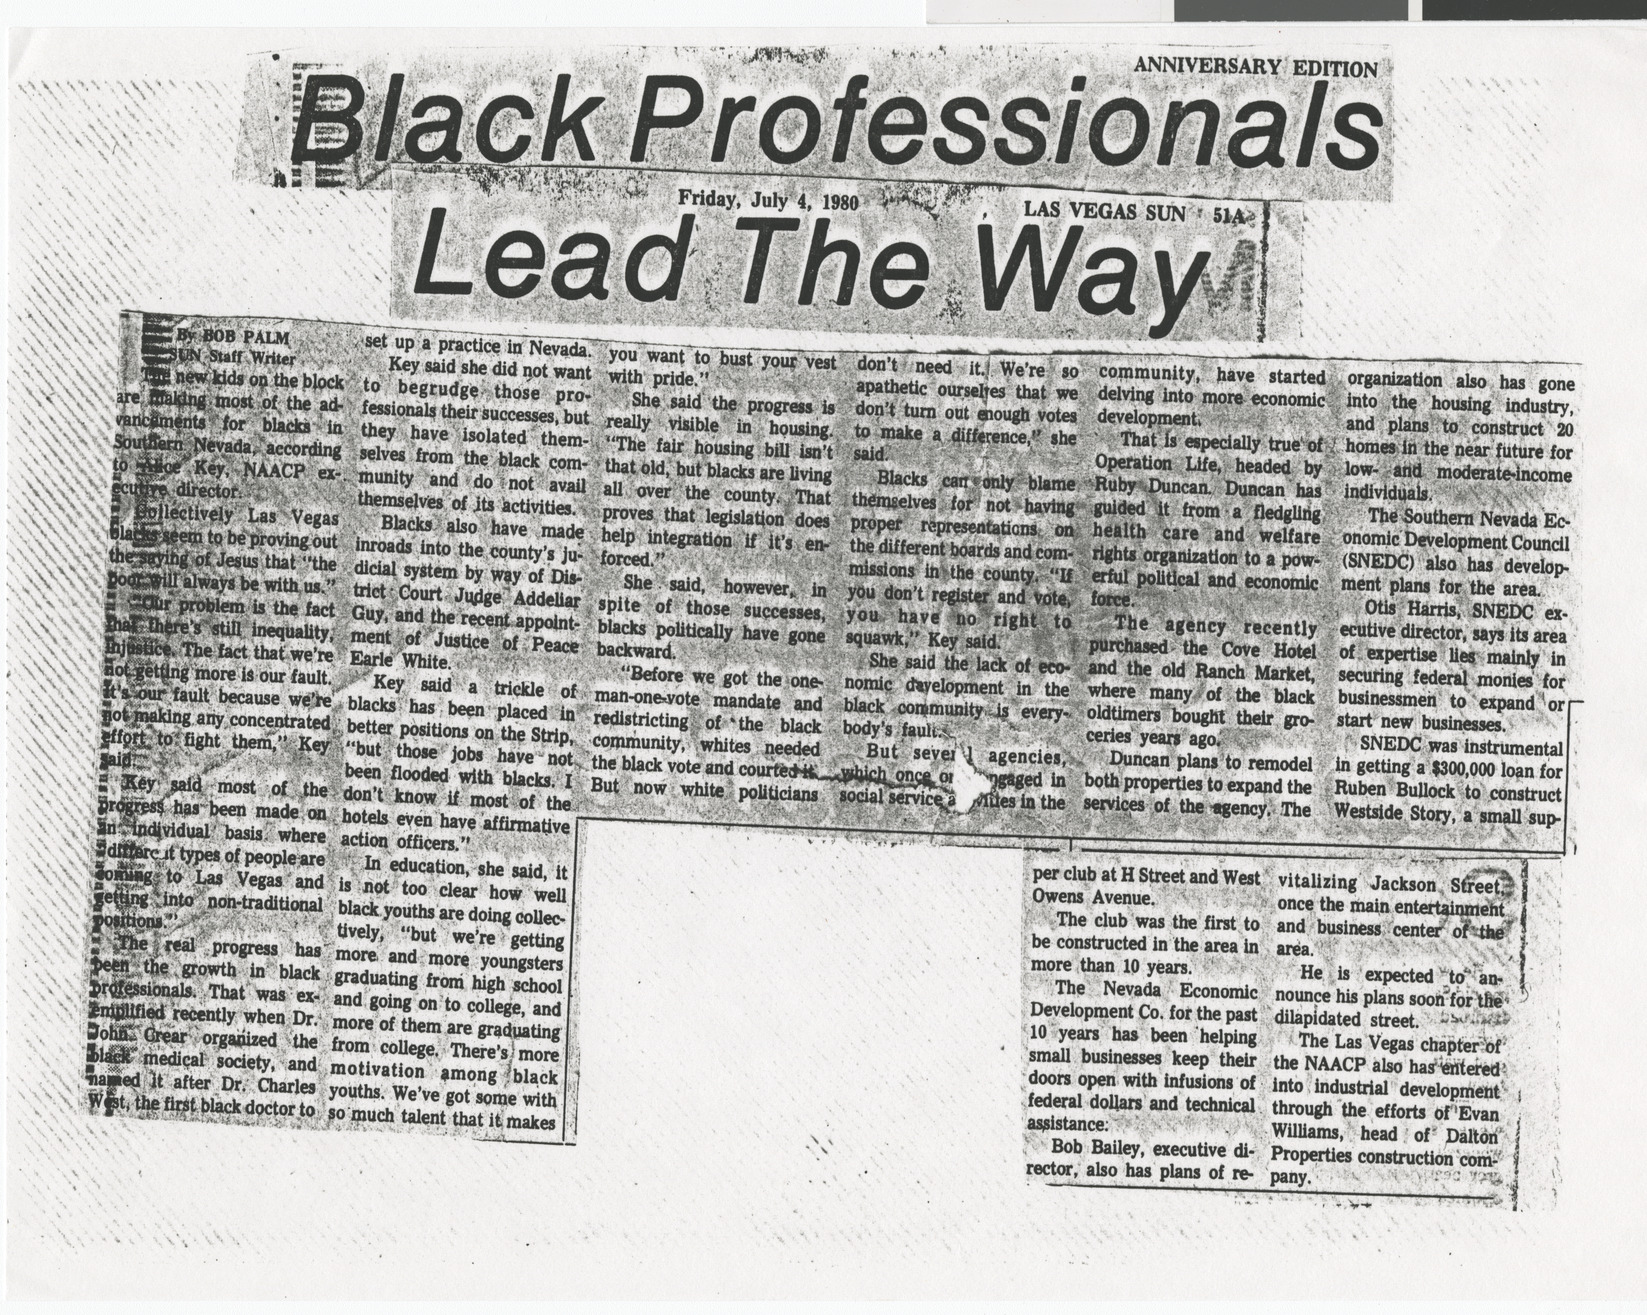 Newspaper clipping (copy), Las Vegas Sun, Black Professionals Lead the Way, July 4, 1980